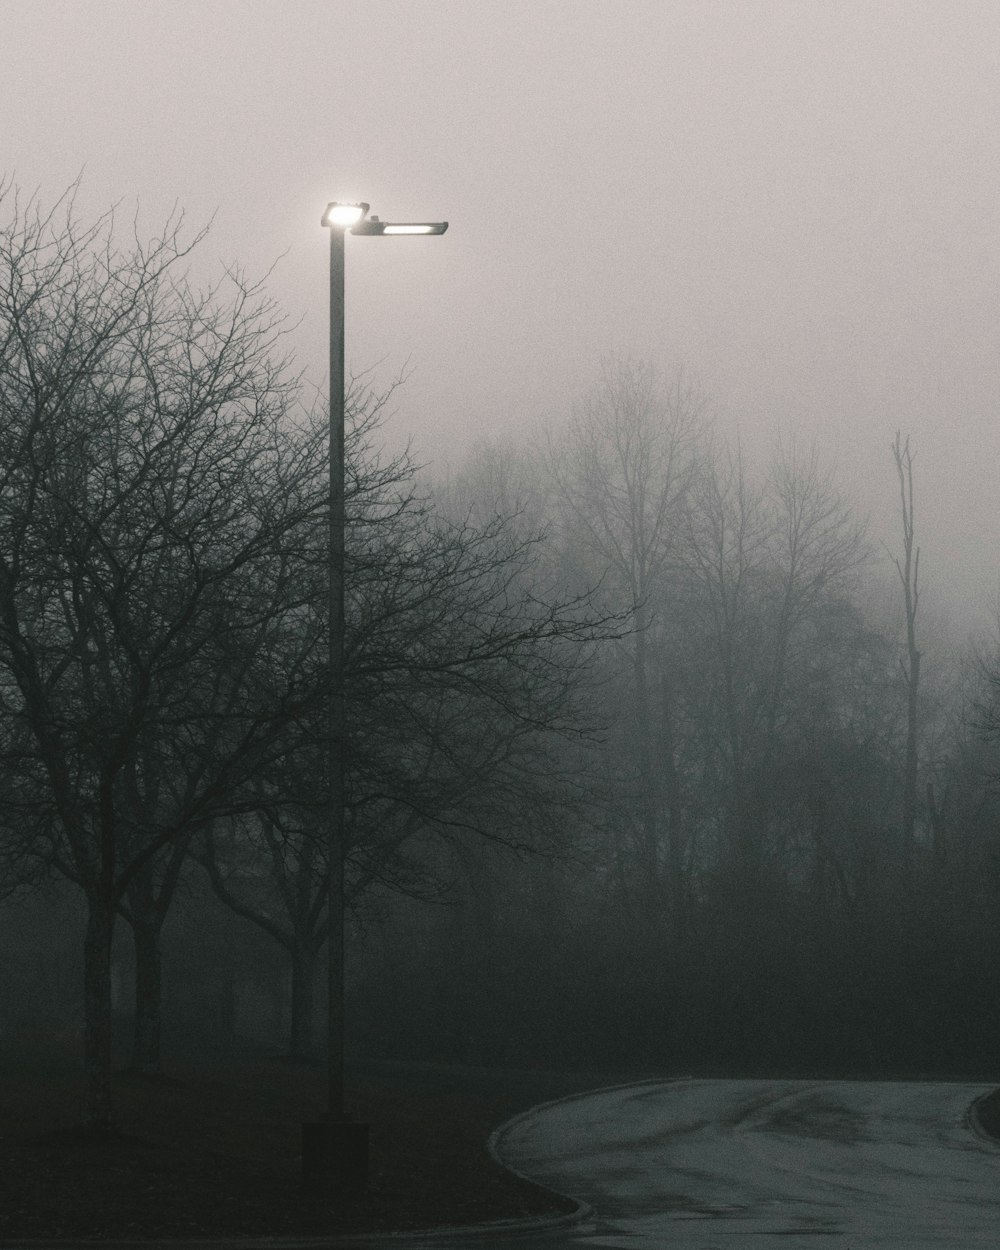 a street light in the middle of a foggy park